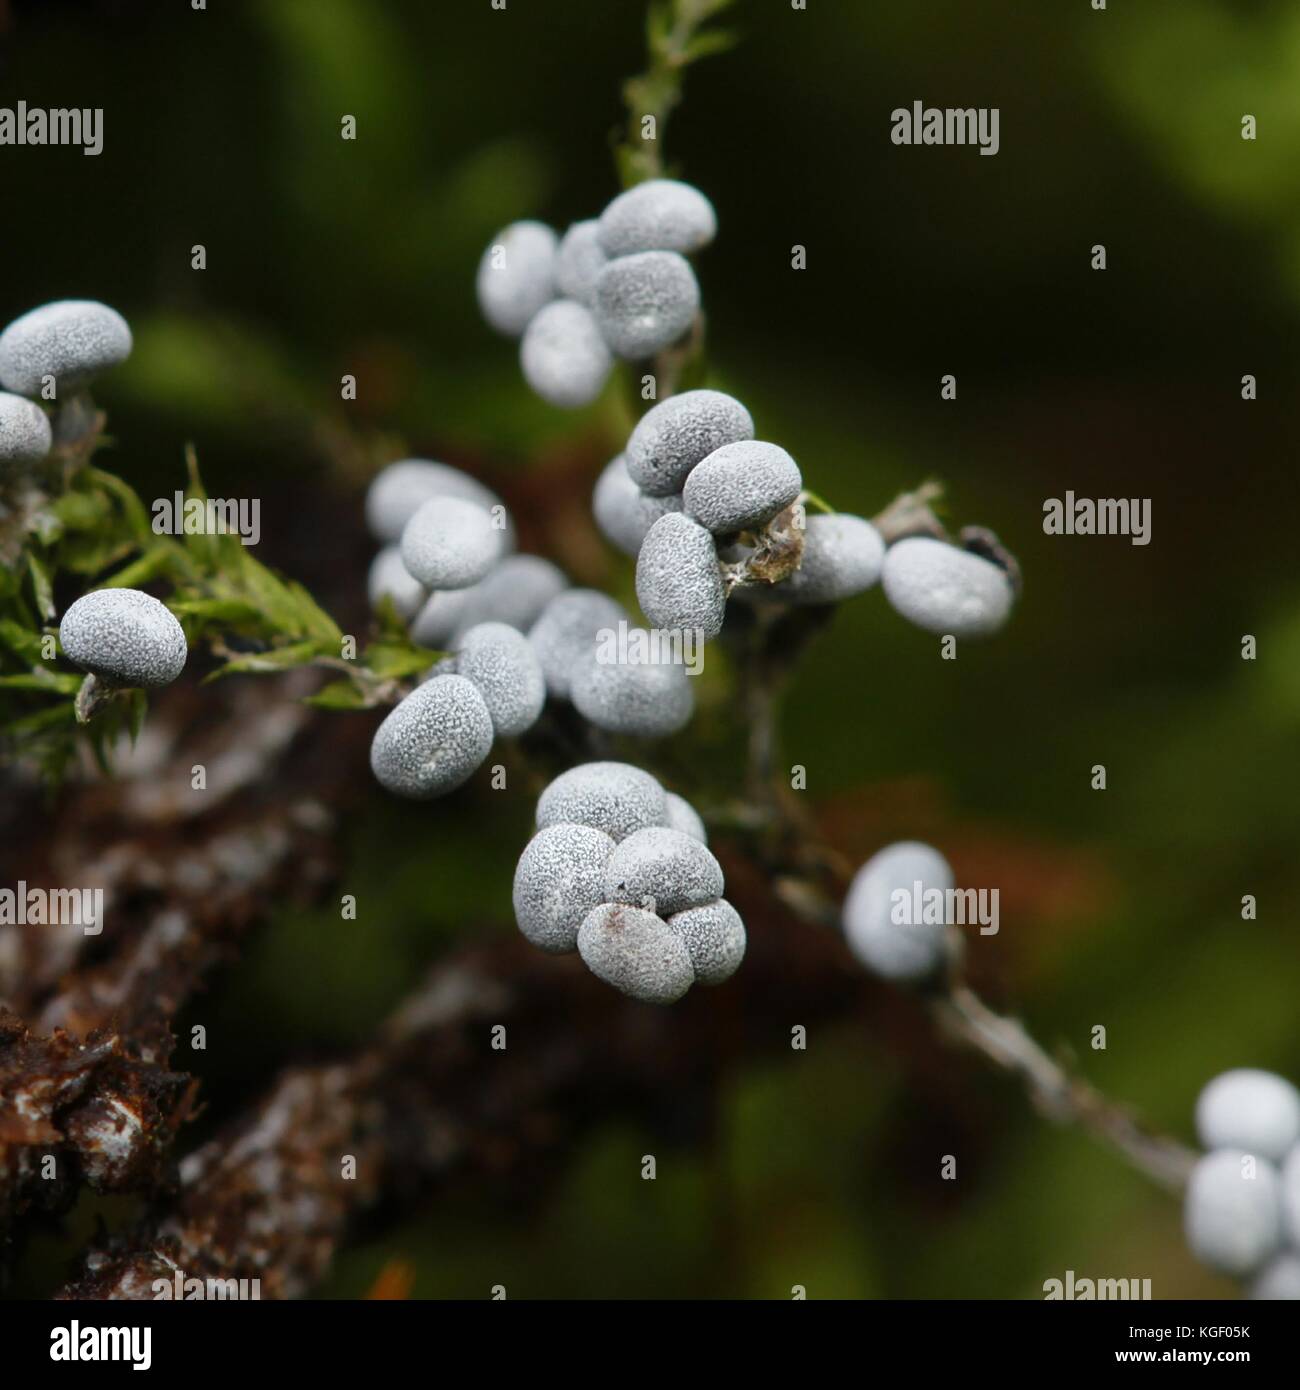 Physarum sp, slime mold Stock Photo